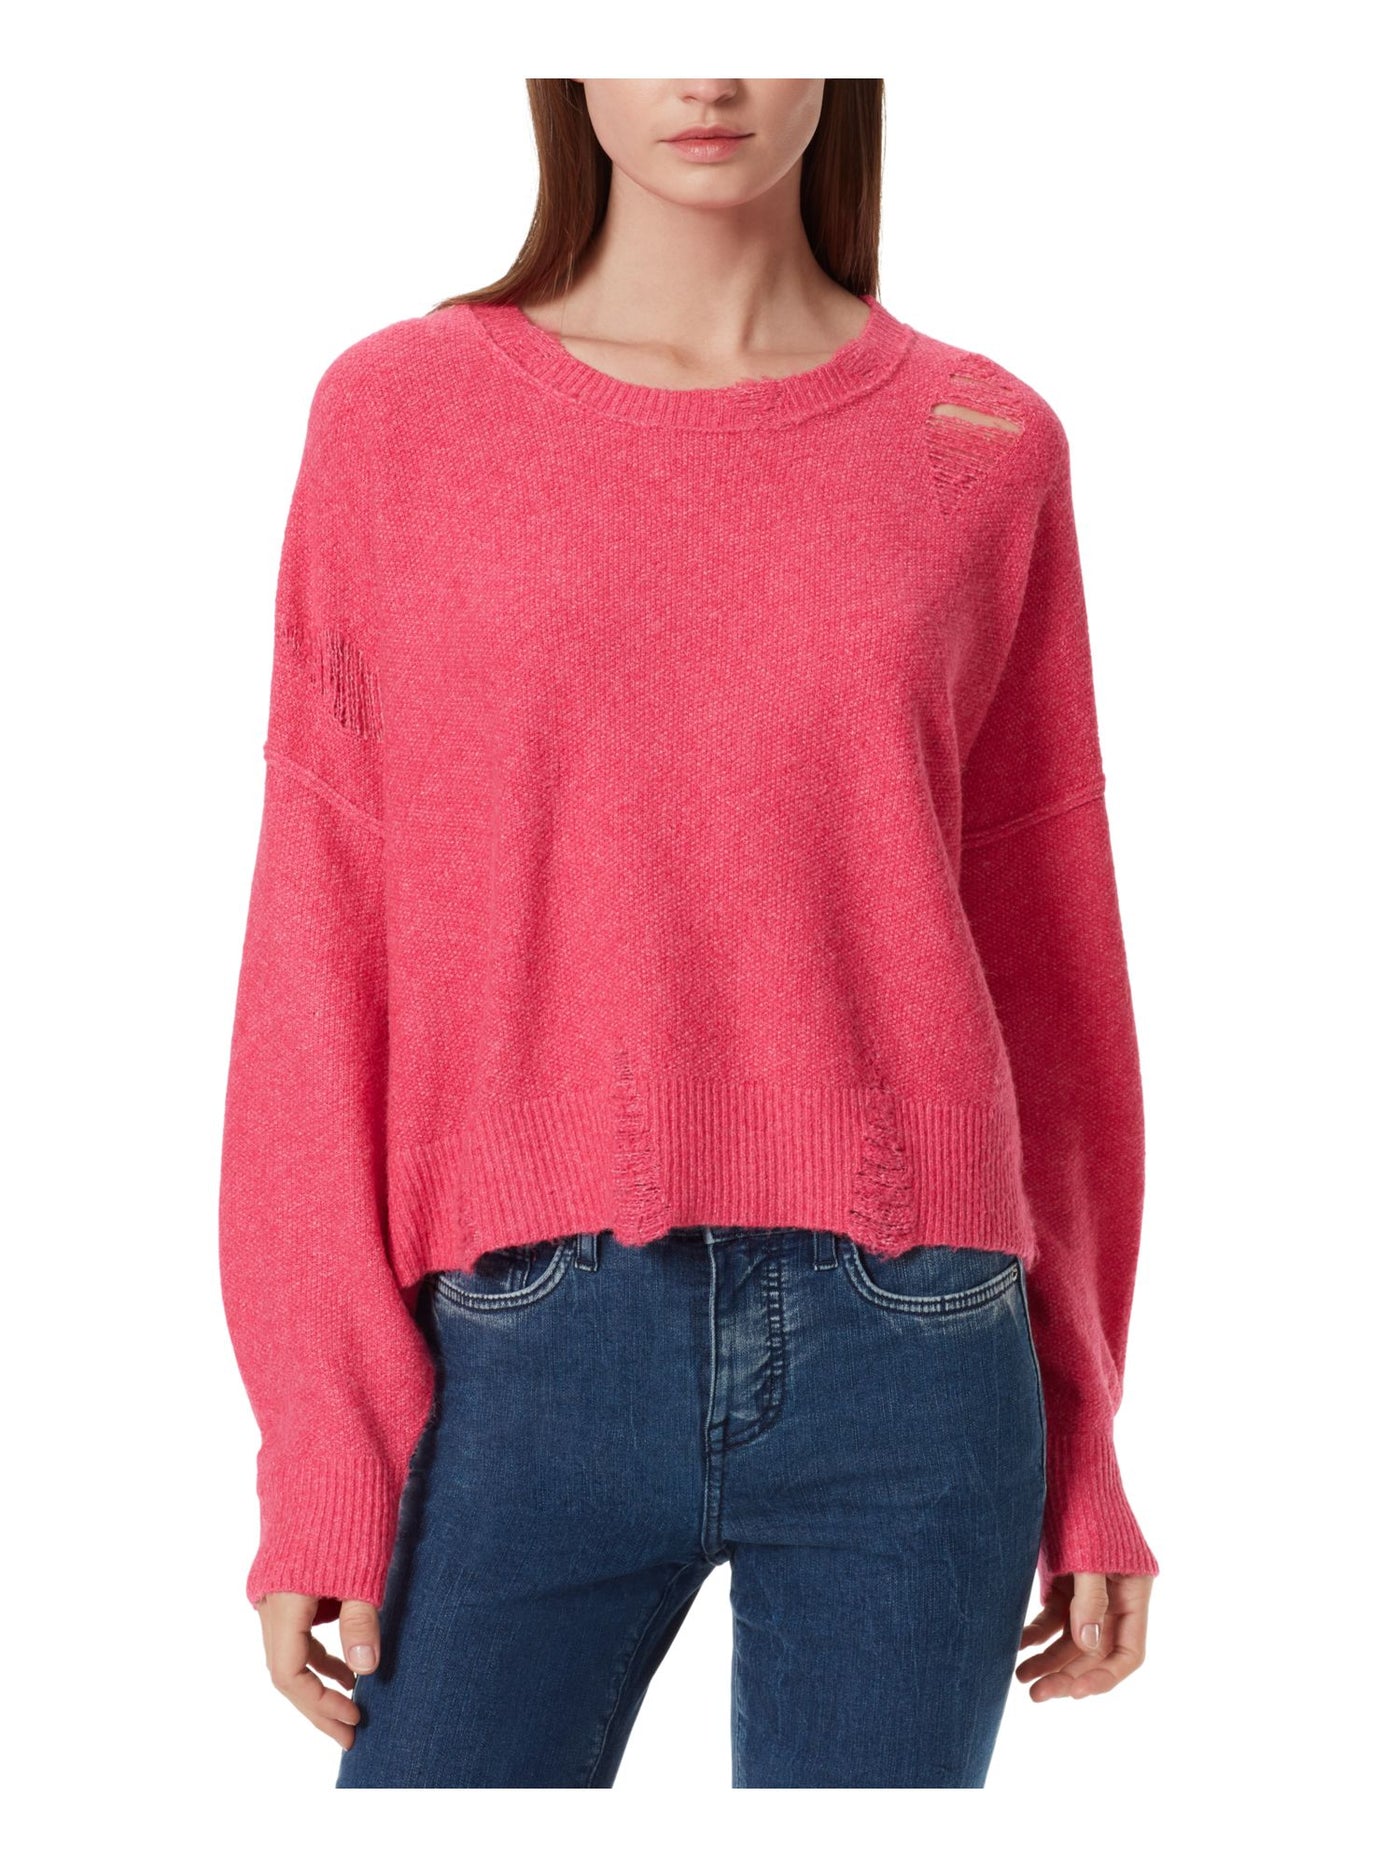 FRAYED JEANS Womens Pink Distressed Frayed Sheer Ribbed Heather Long Sleeve Crew Neck Sweater XL